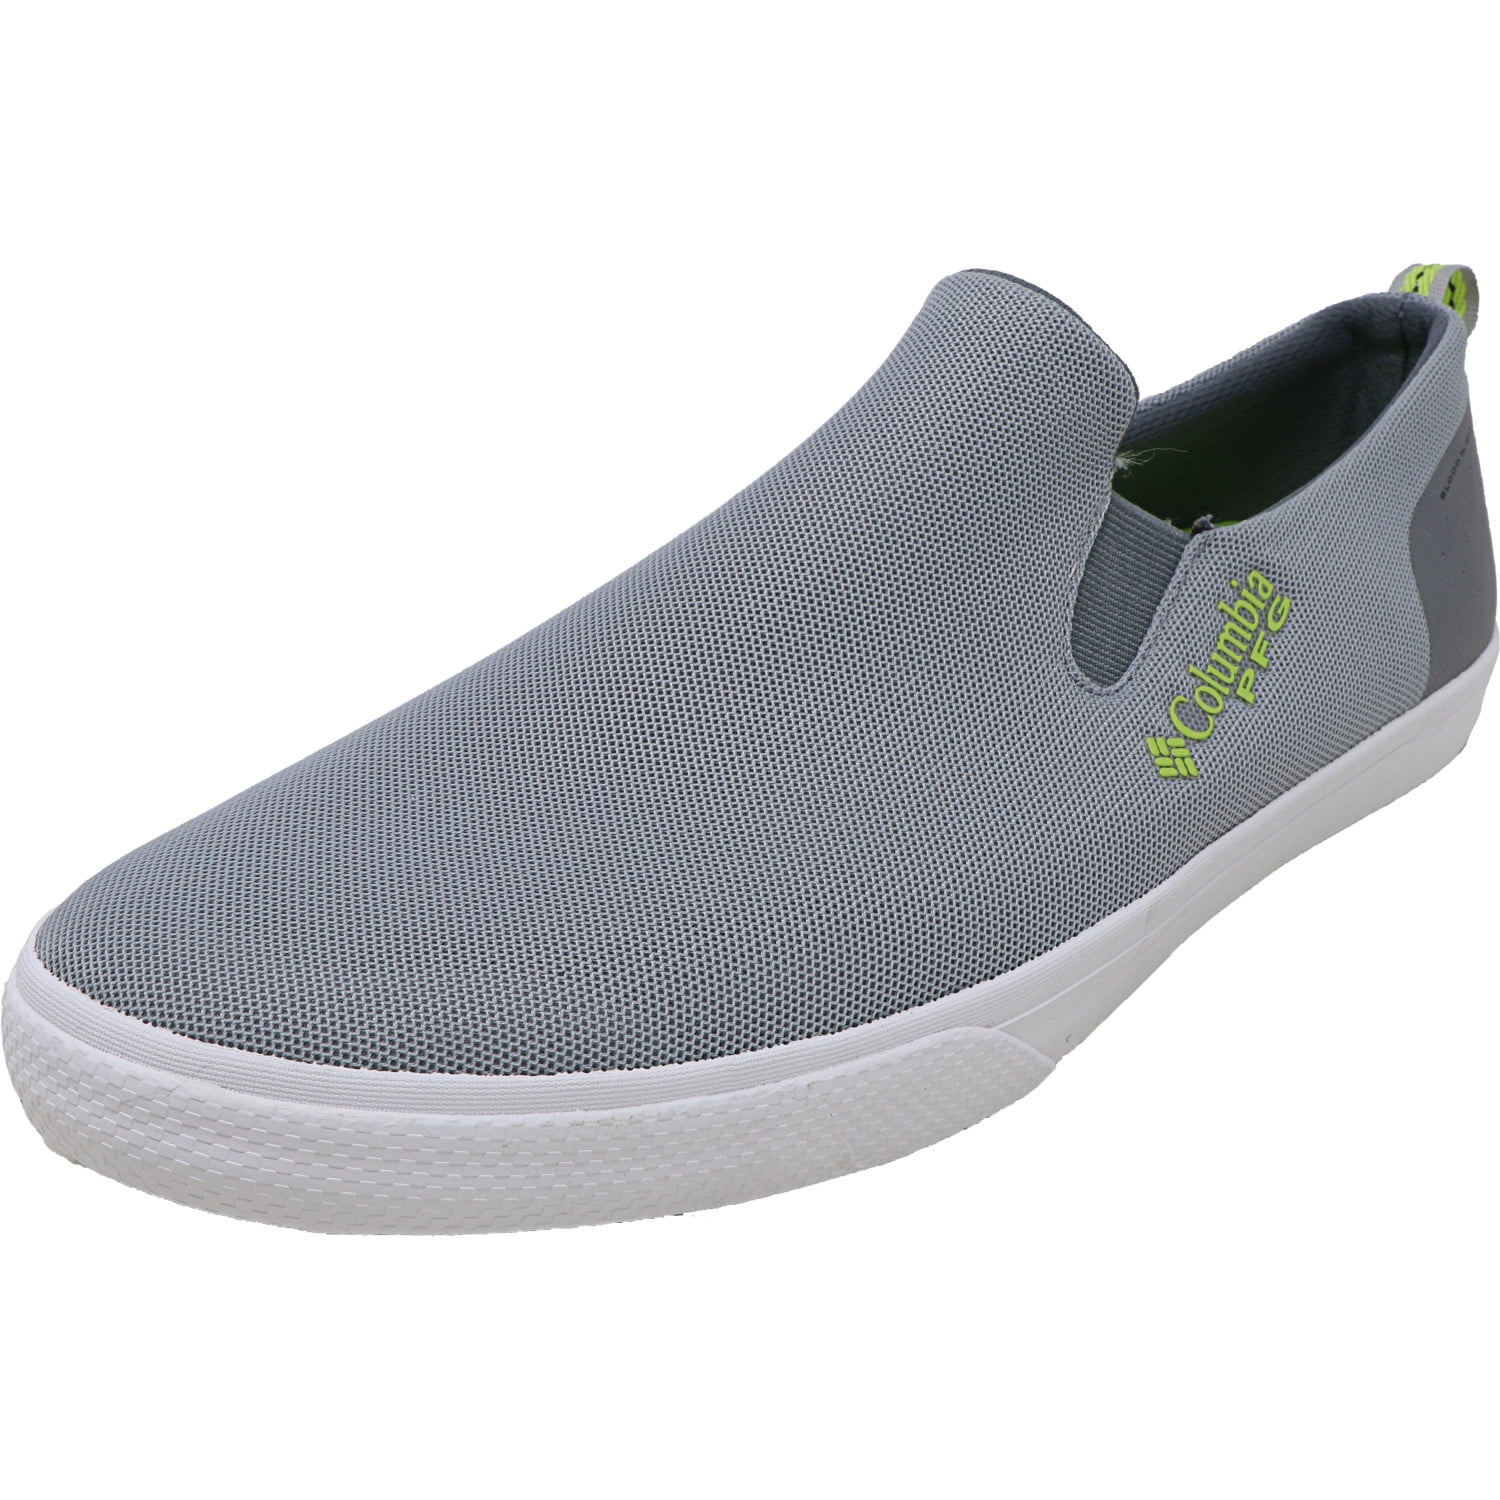 pfg water shoes